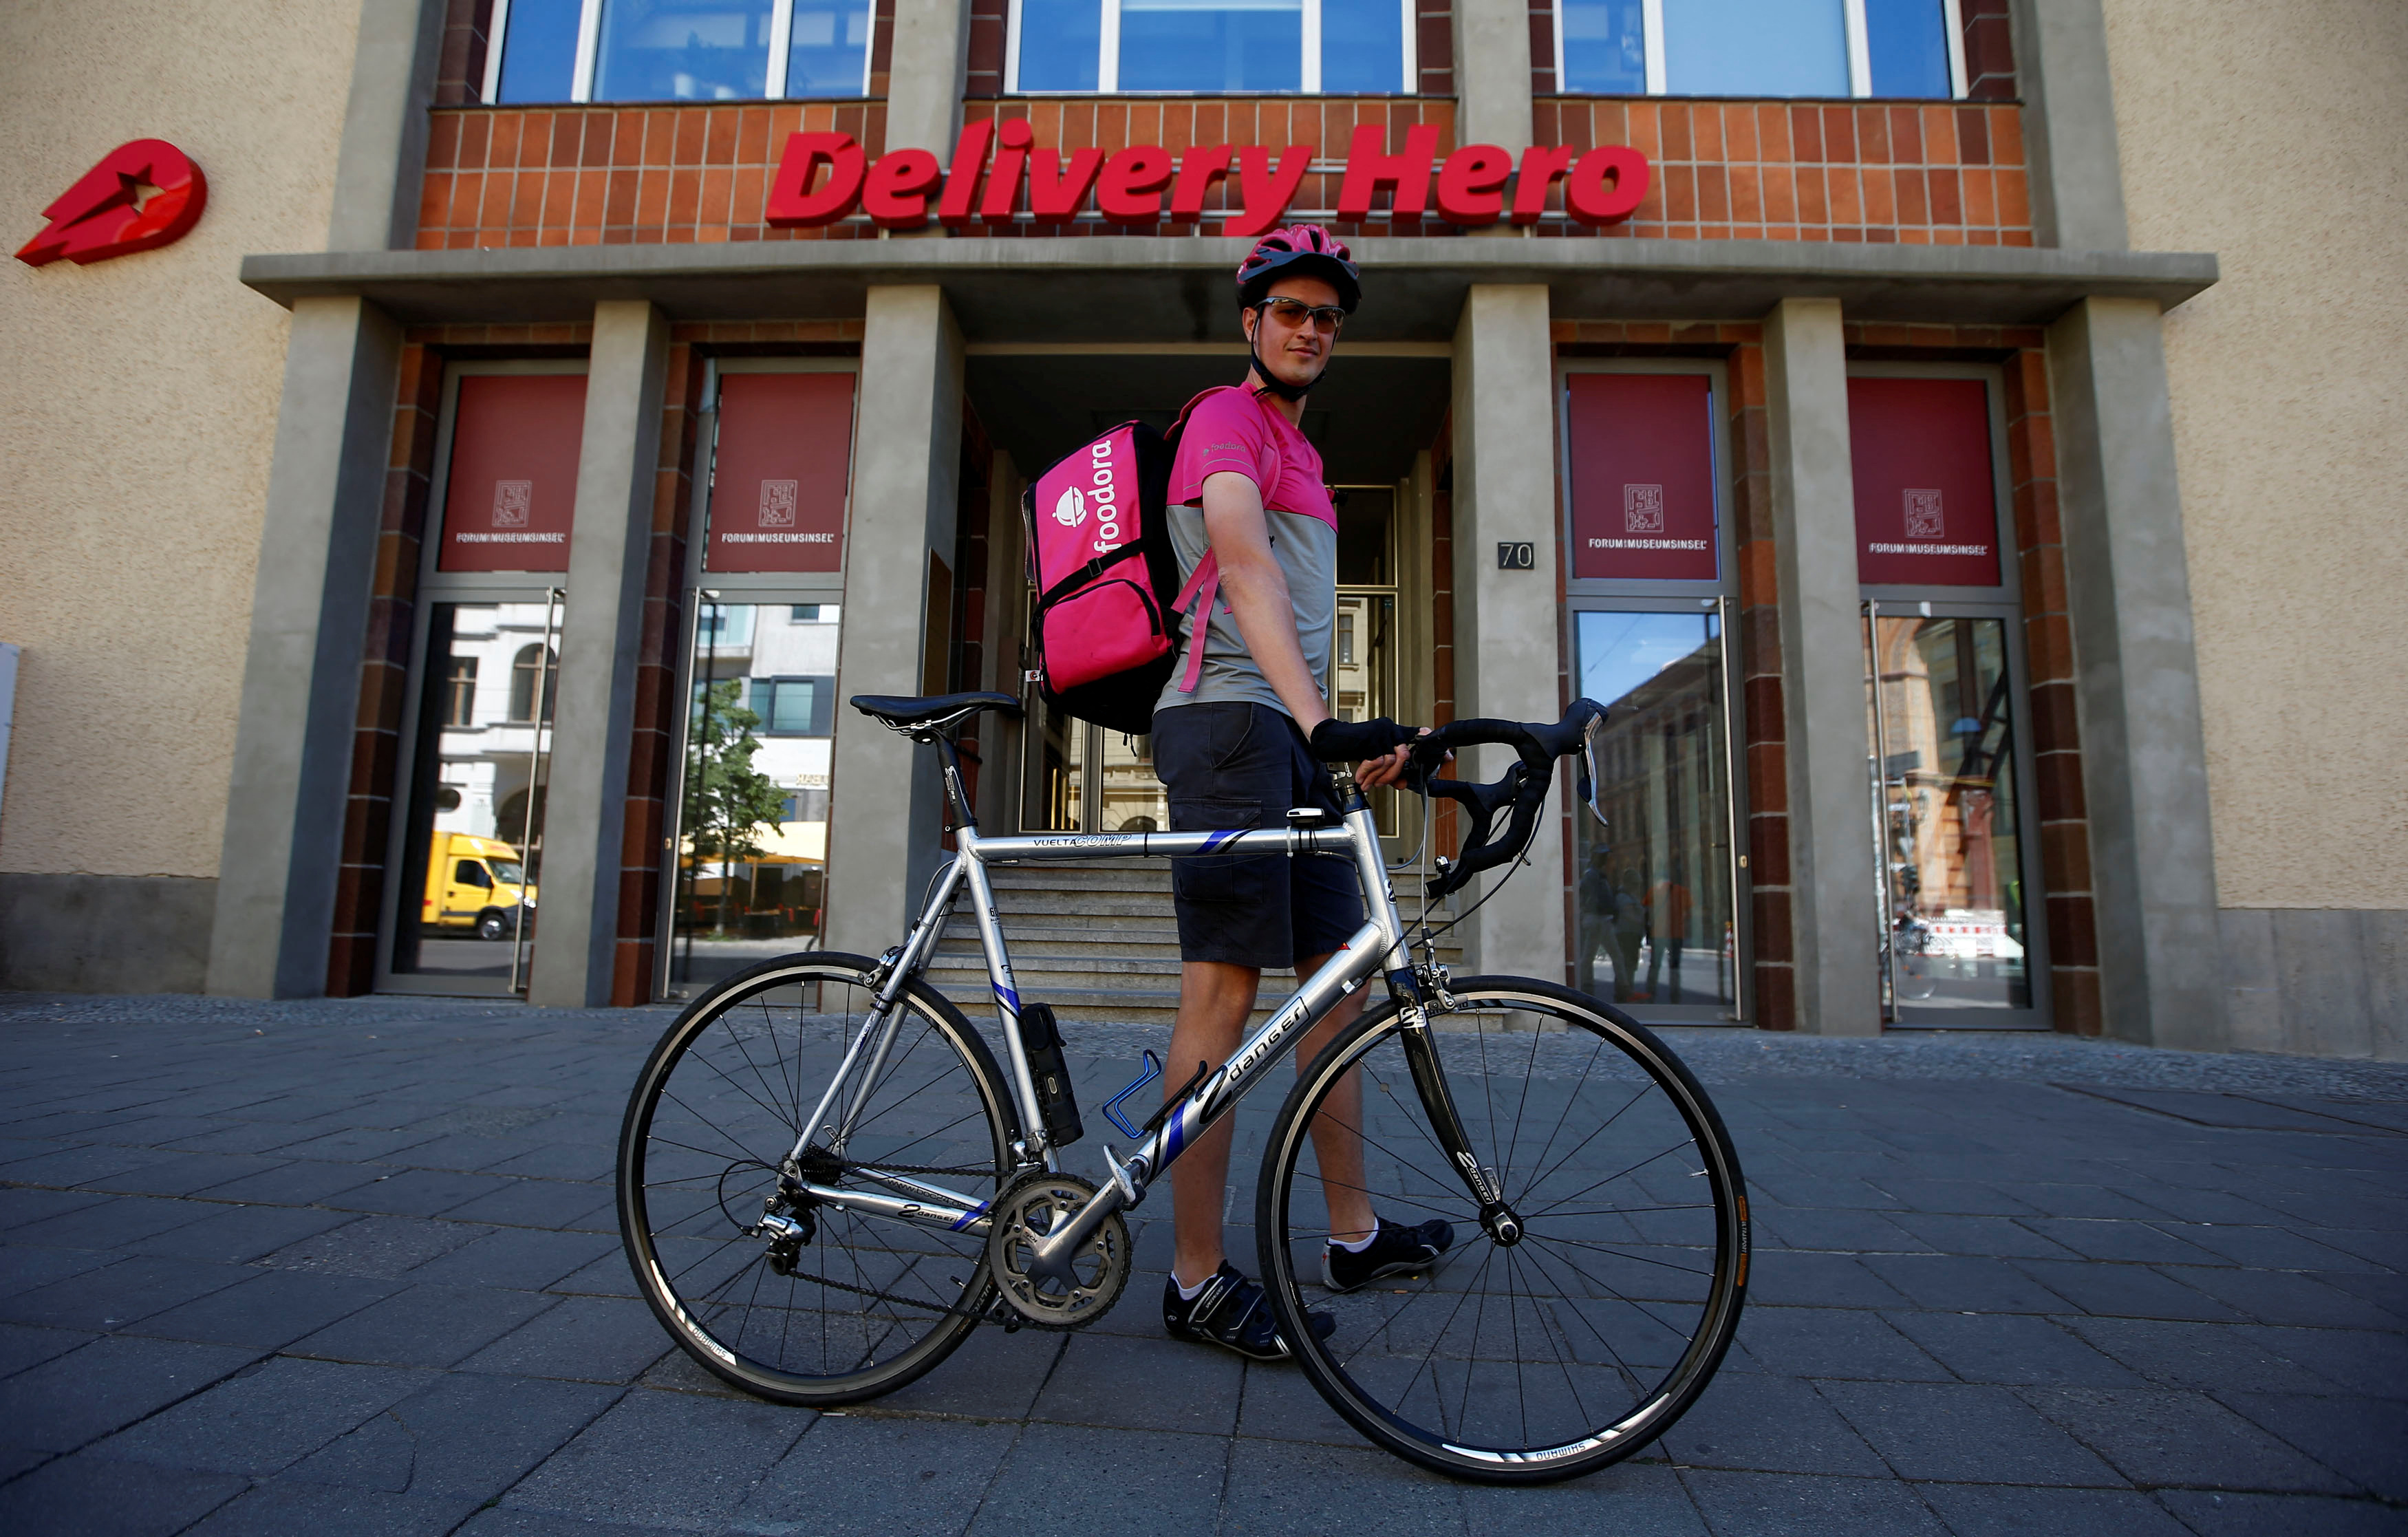 A Foodora delivery cyclist poses in front of the Delivery Hero headquarters in Berlin, Germany, June 2, 2017. REUTERS/Fabrizio Bensch